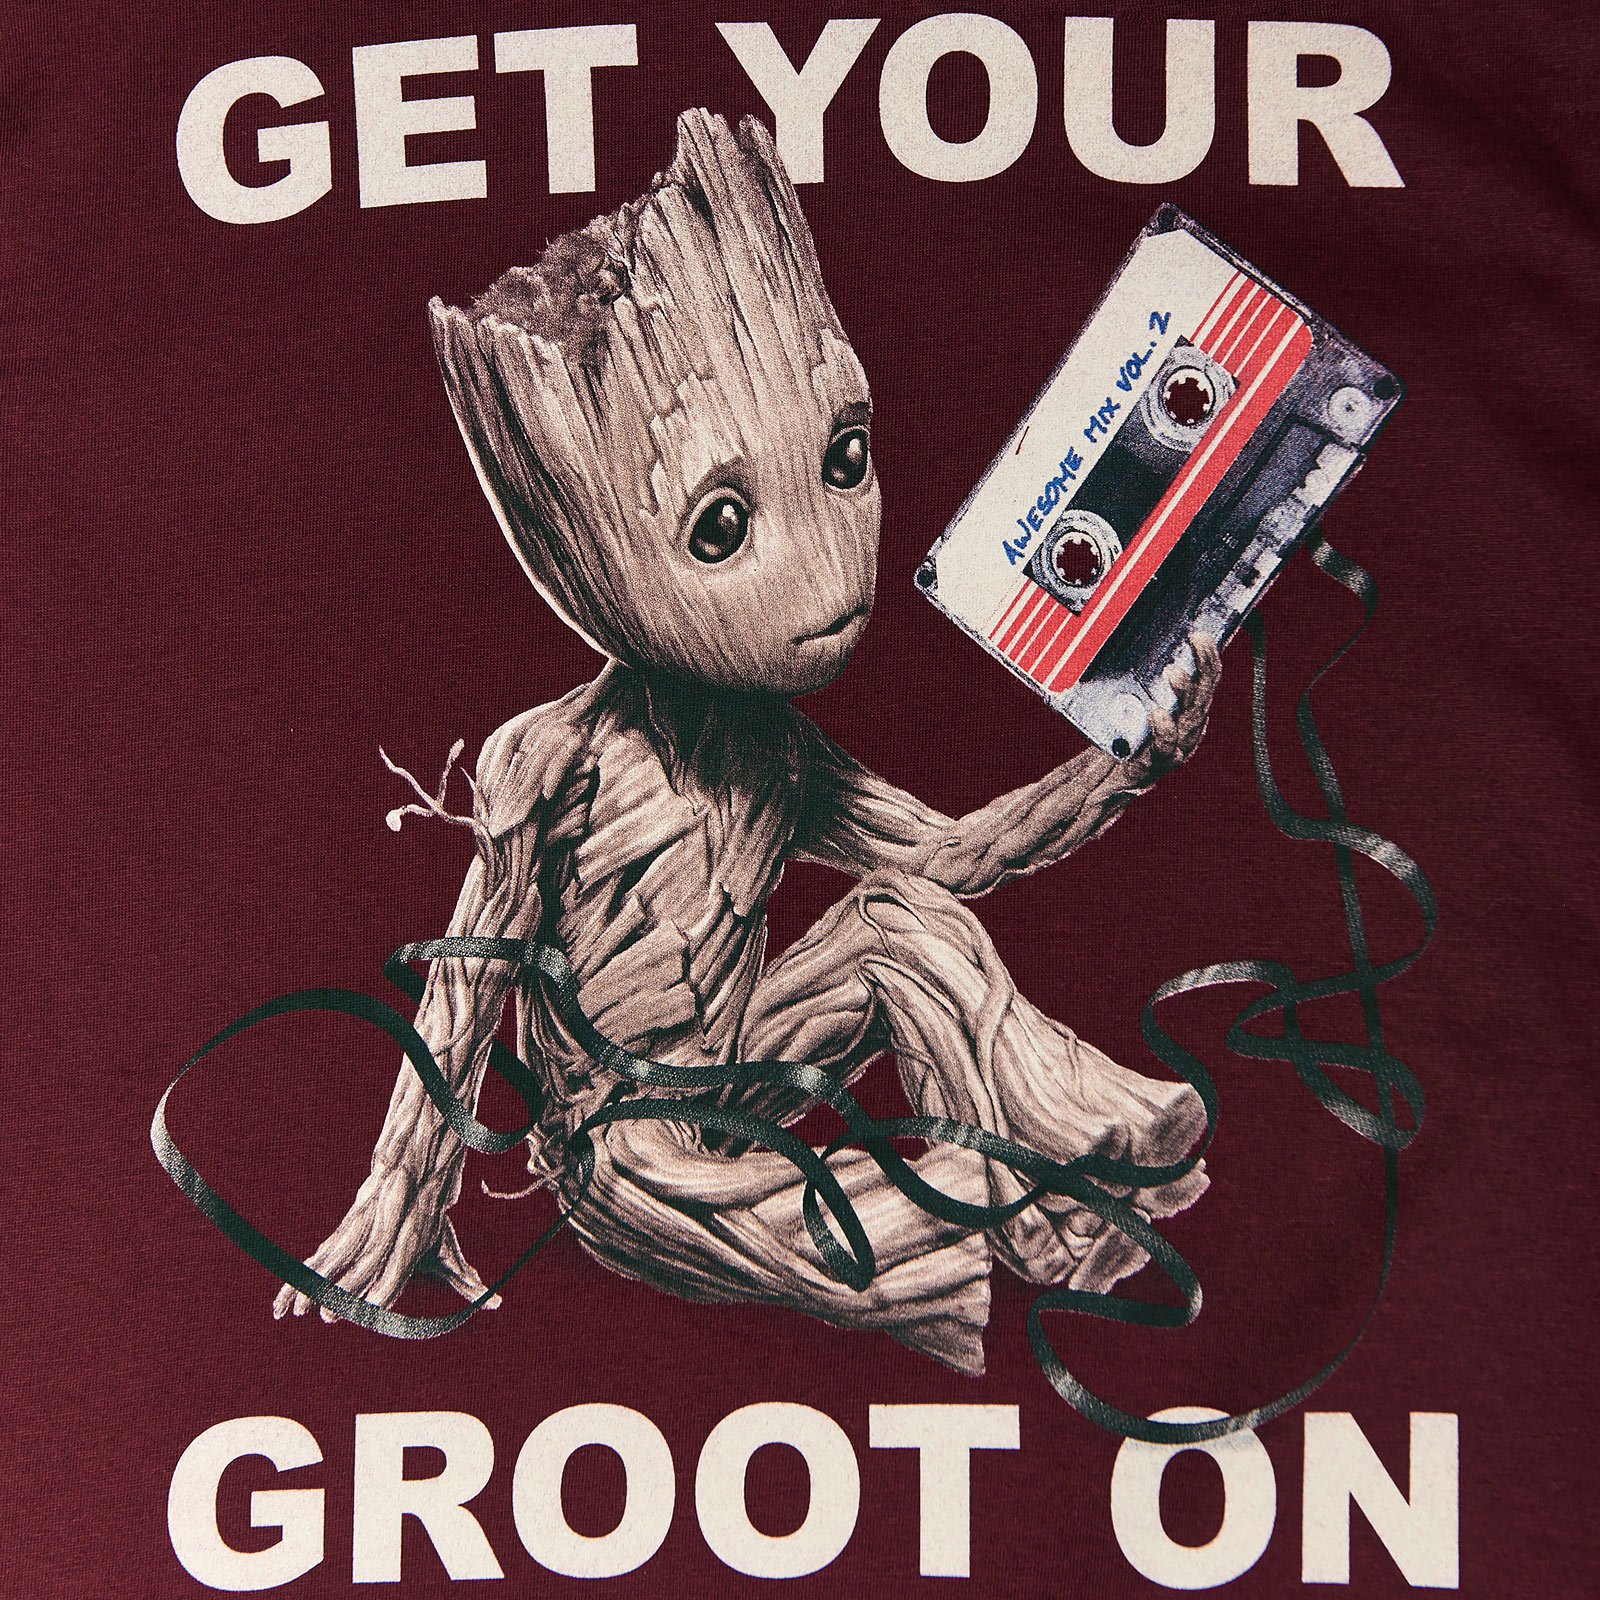 Guardians of the Galaxy - Groot T-Shirt Kinder rot